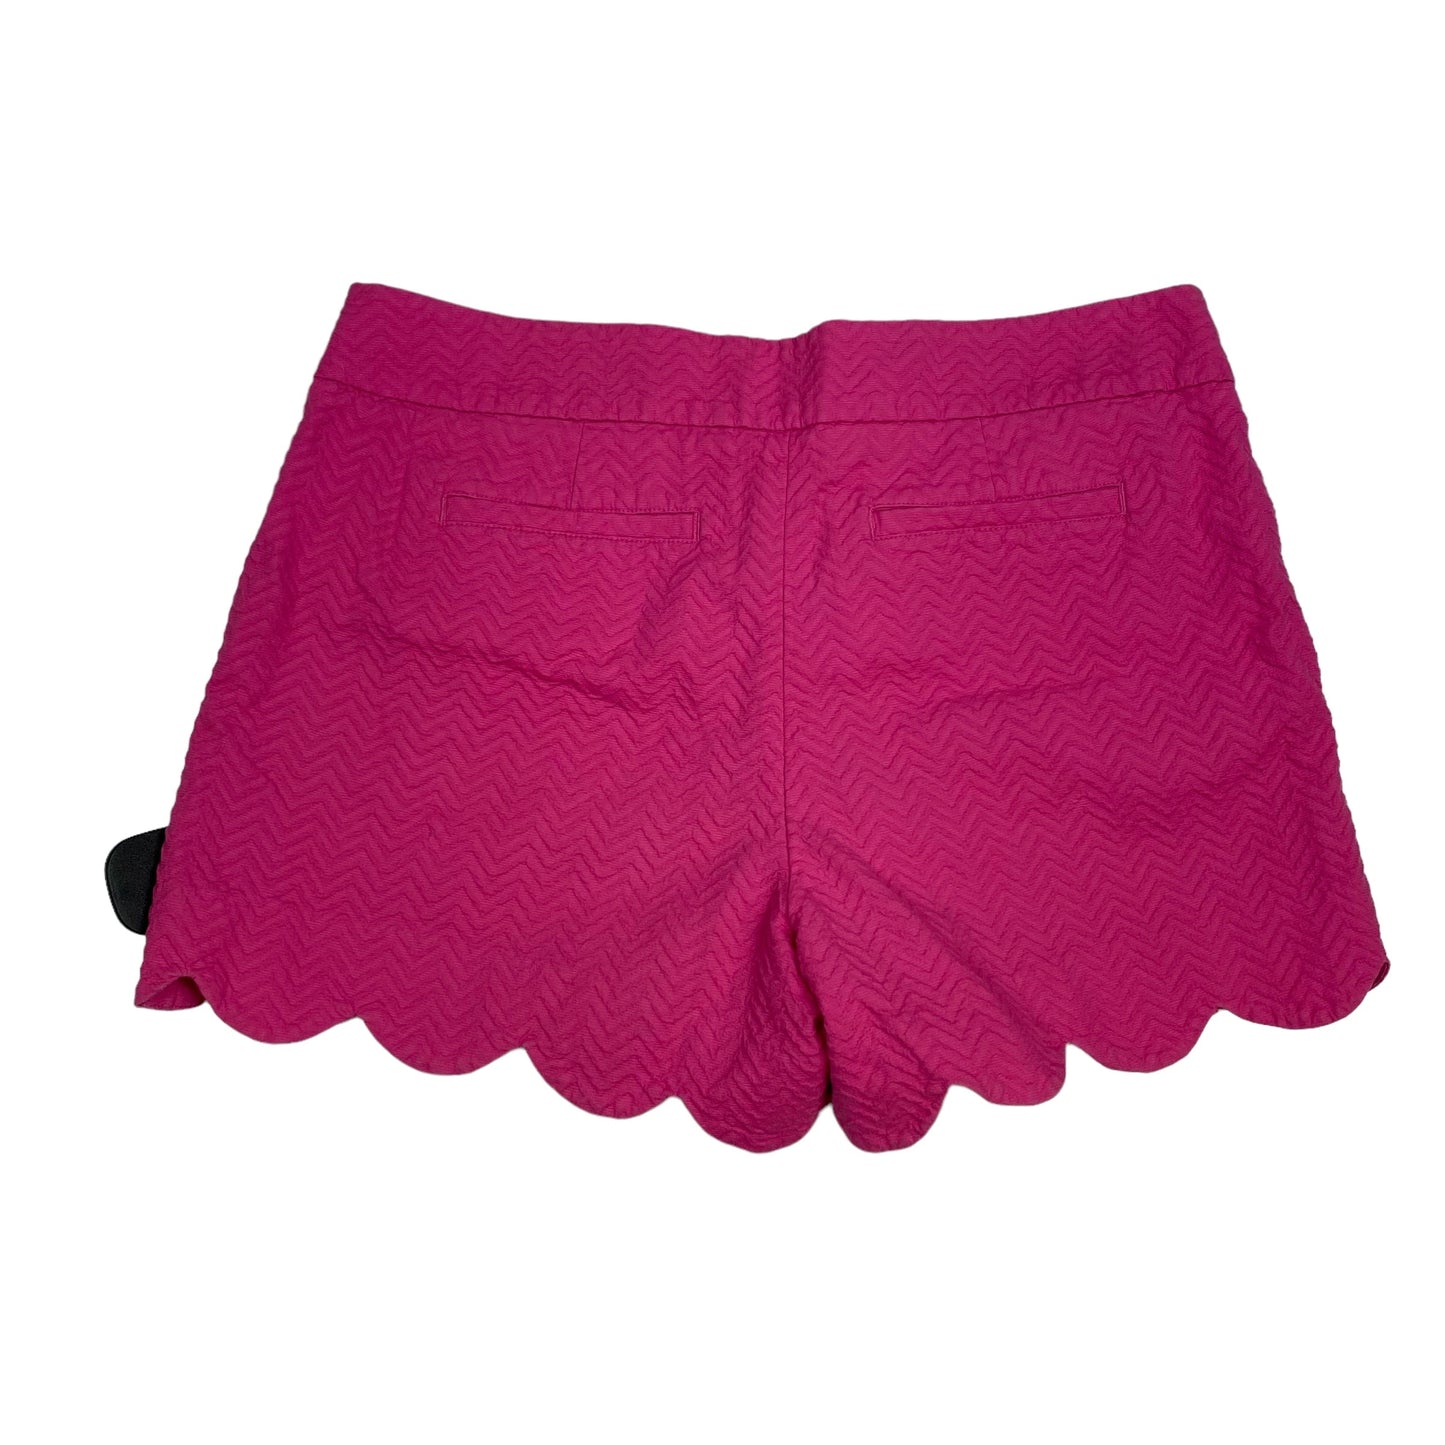 Shorts By Crown And Ivy  Size: 6petite